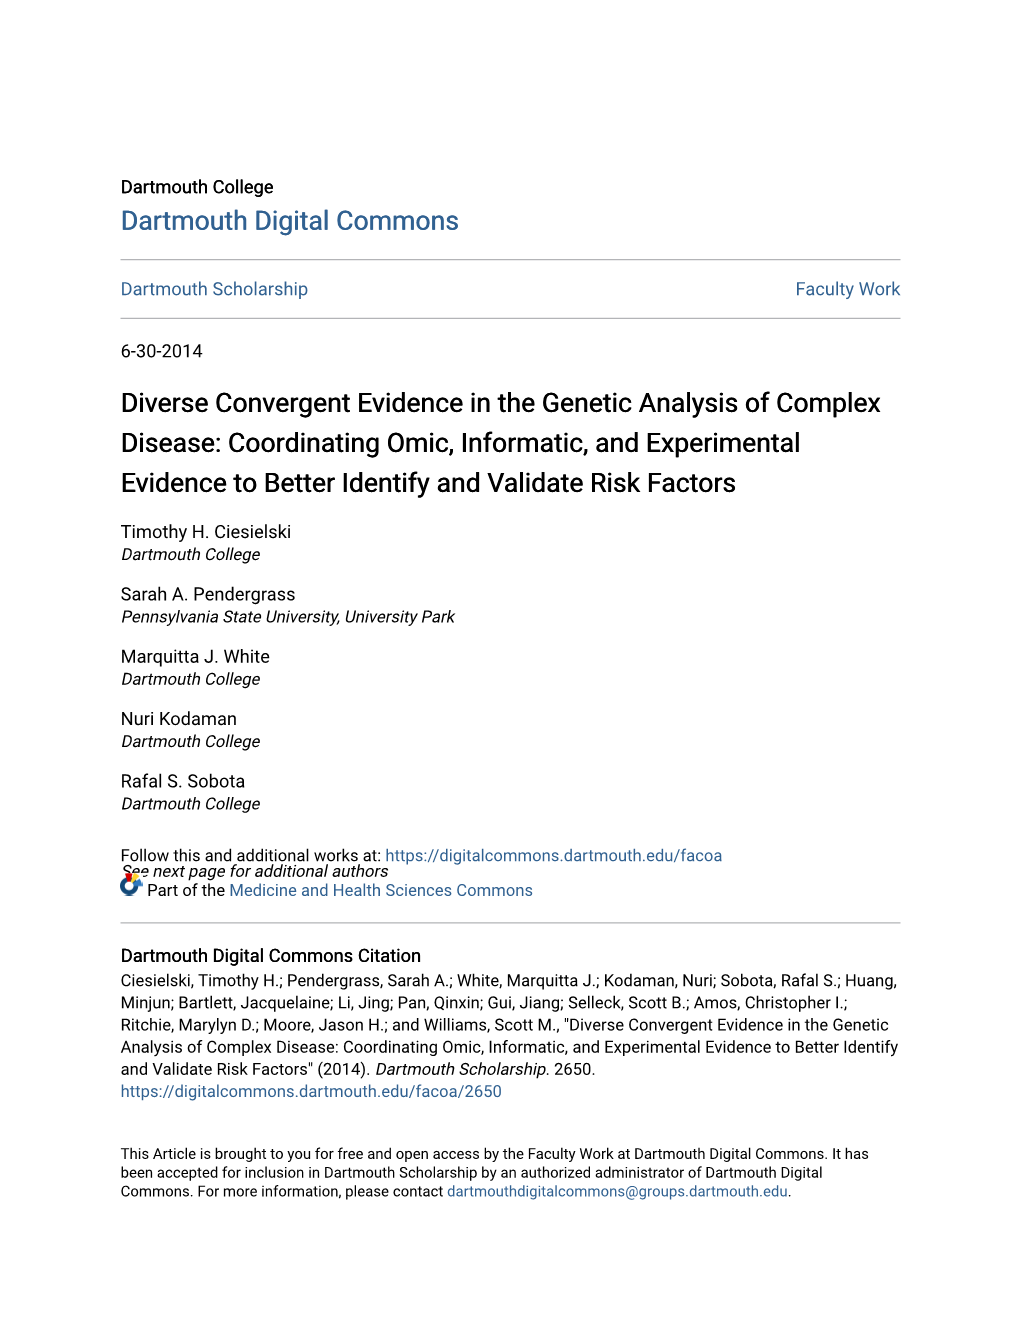 Diverse Convergent Evidence in the Genetic Analysis of Complex Disease